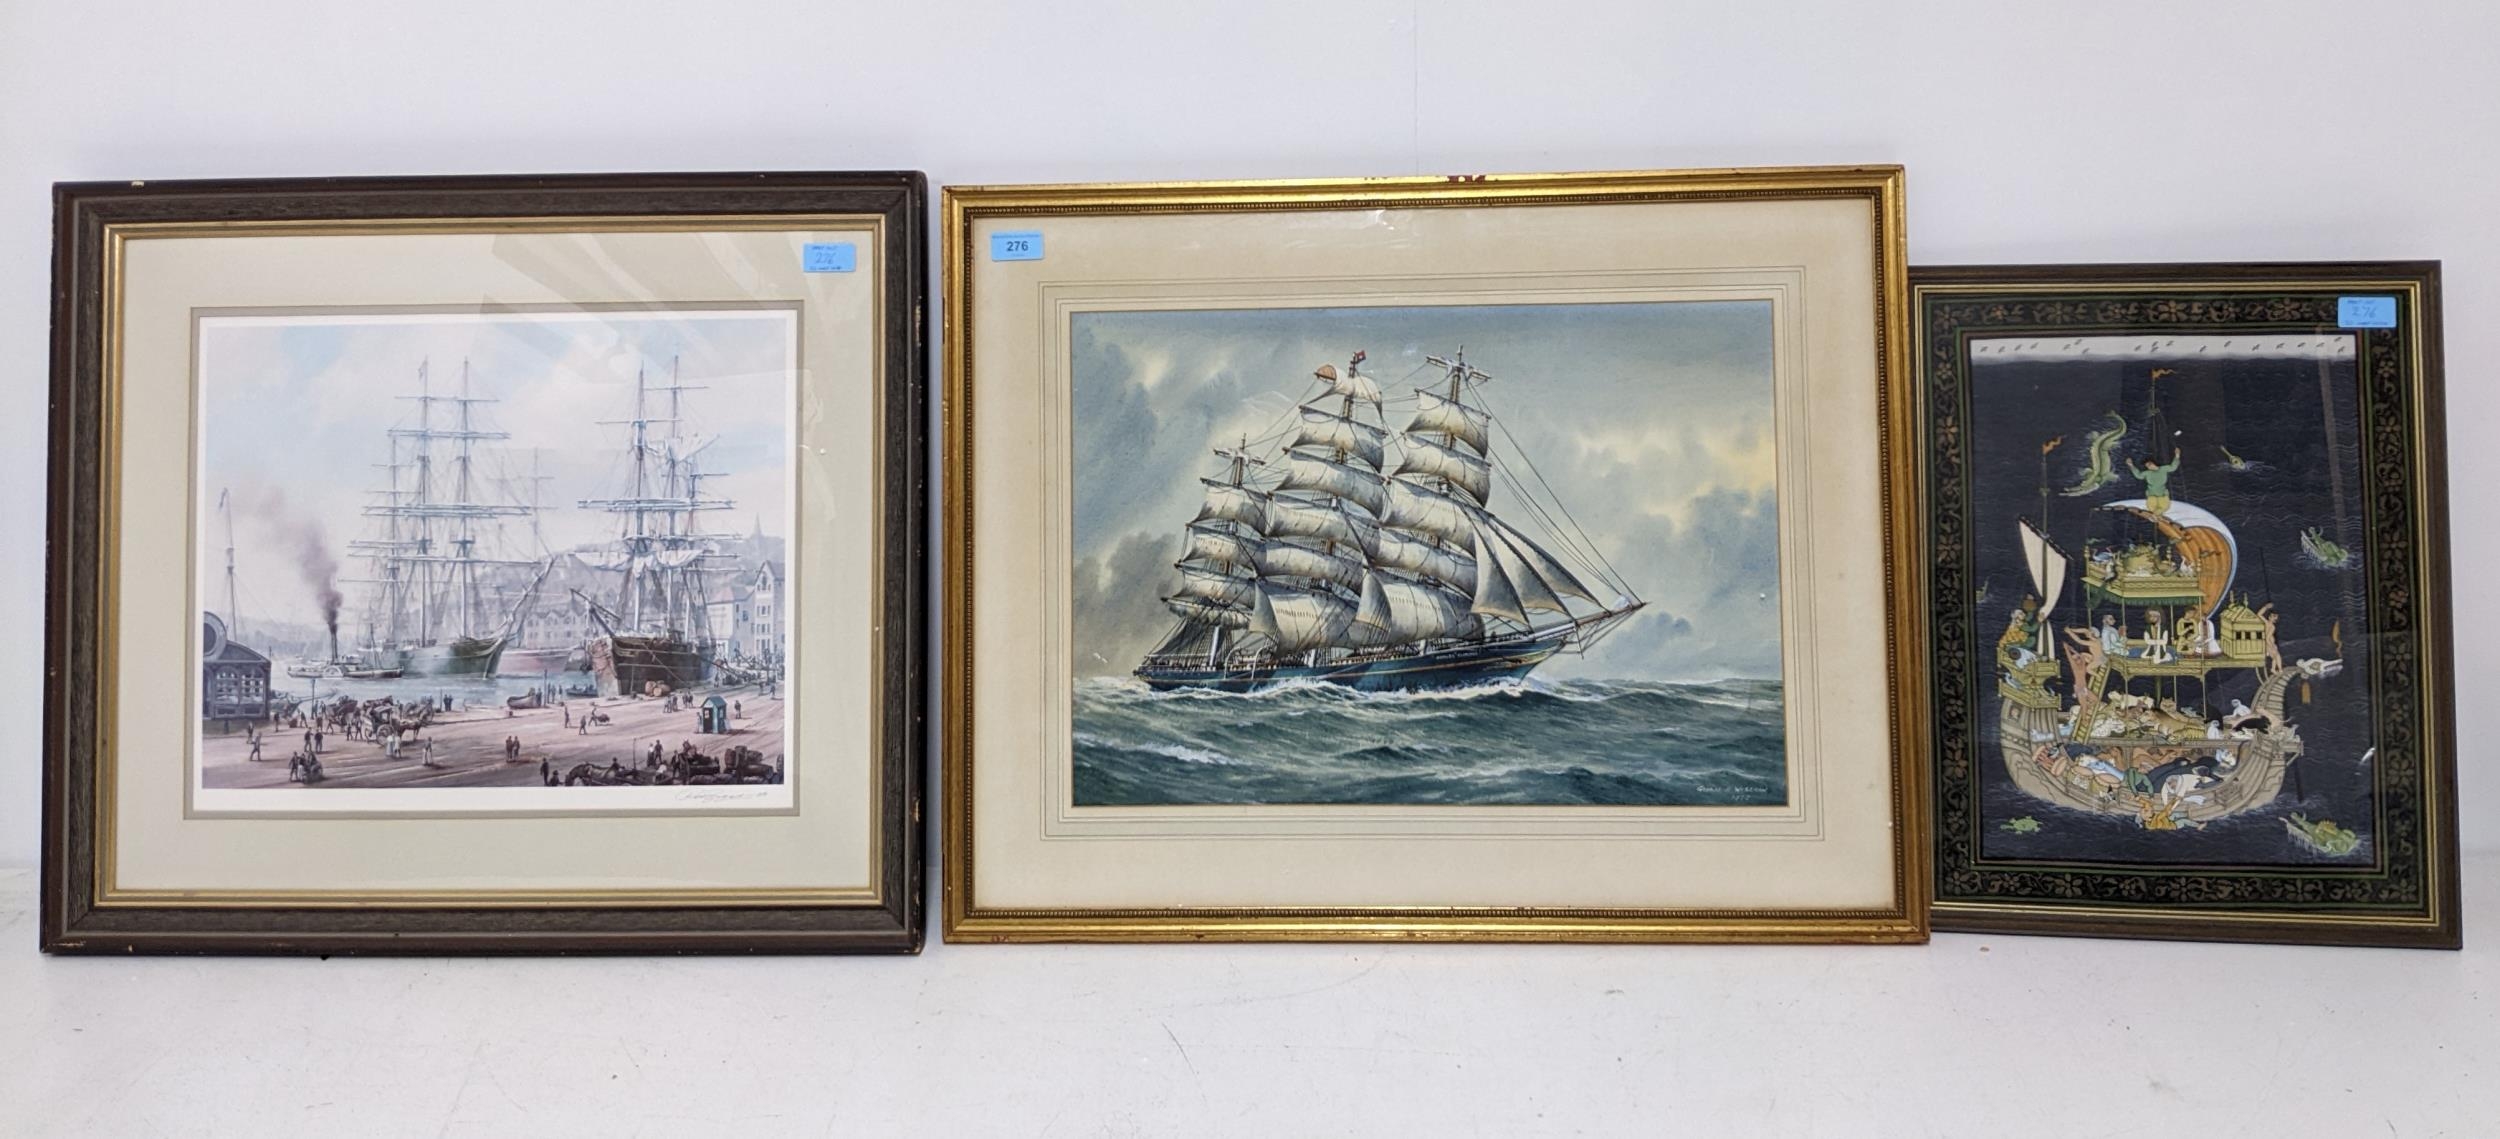 George P Wiseman - study in watercolour of the Samuel Plimsoll, a three-masted sailing vessel,